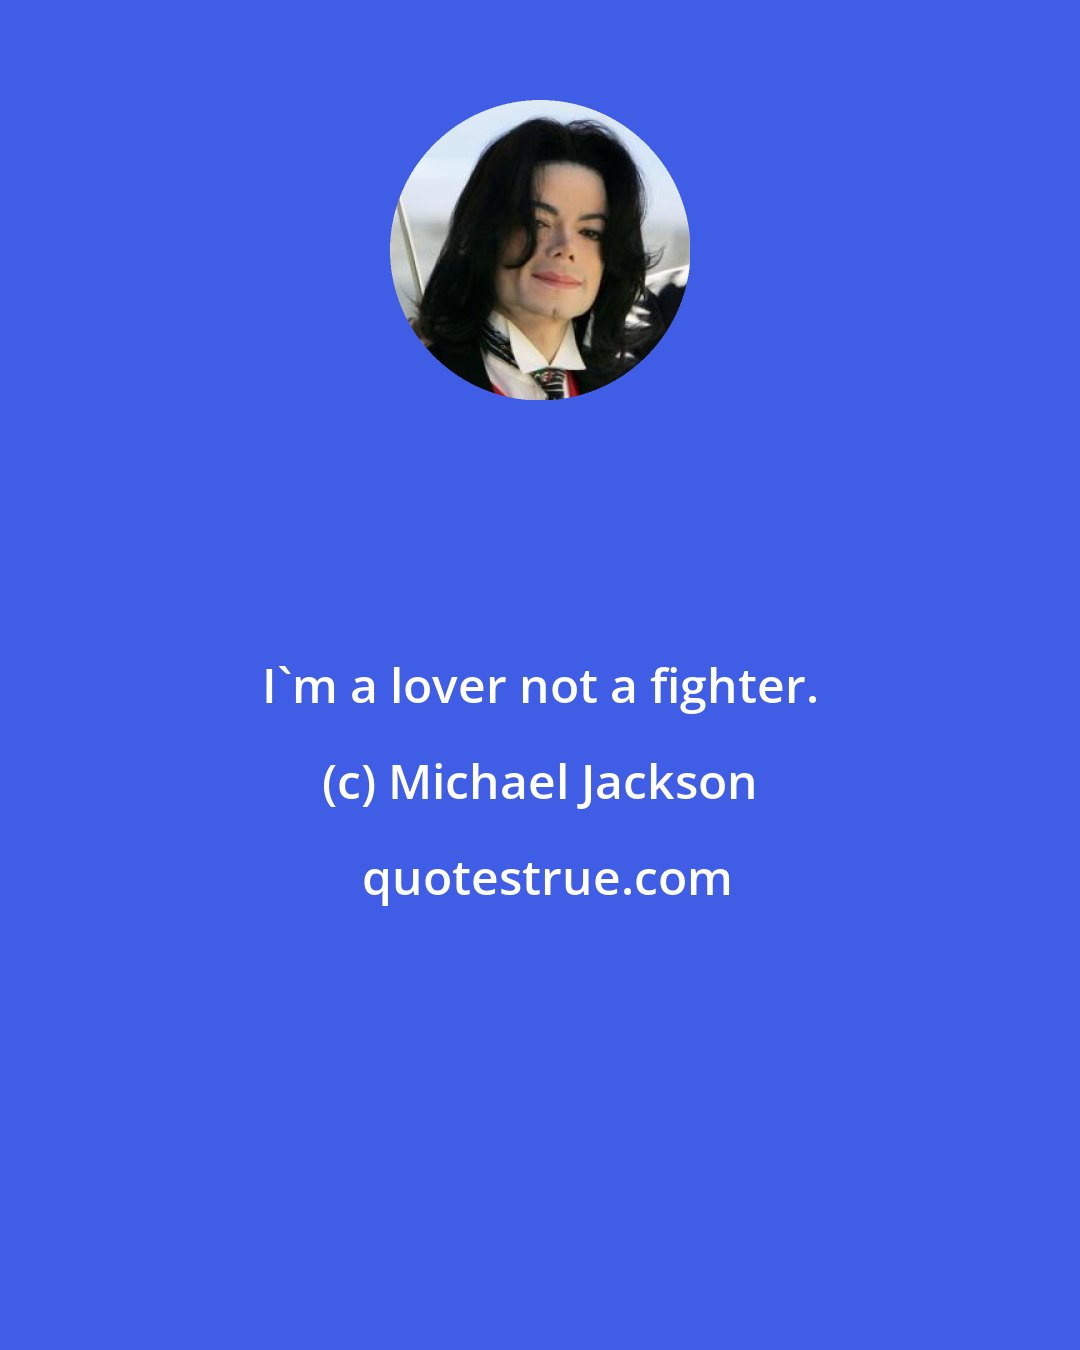 Michael Jackson: I'm a lover not a fighter.